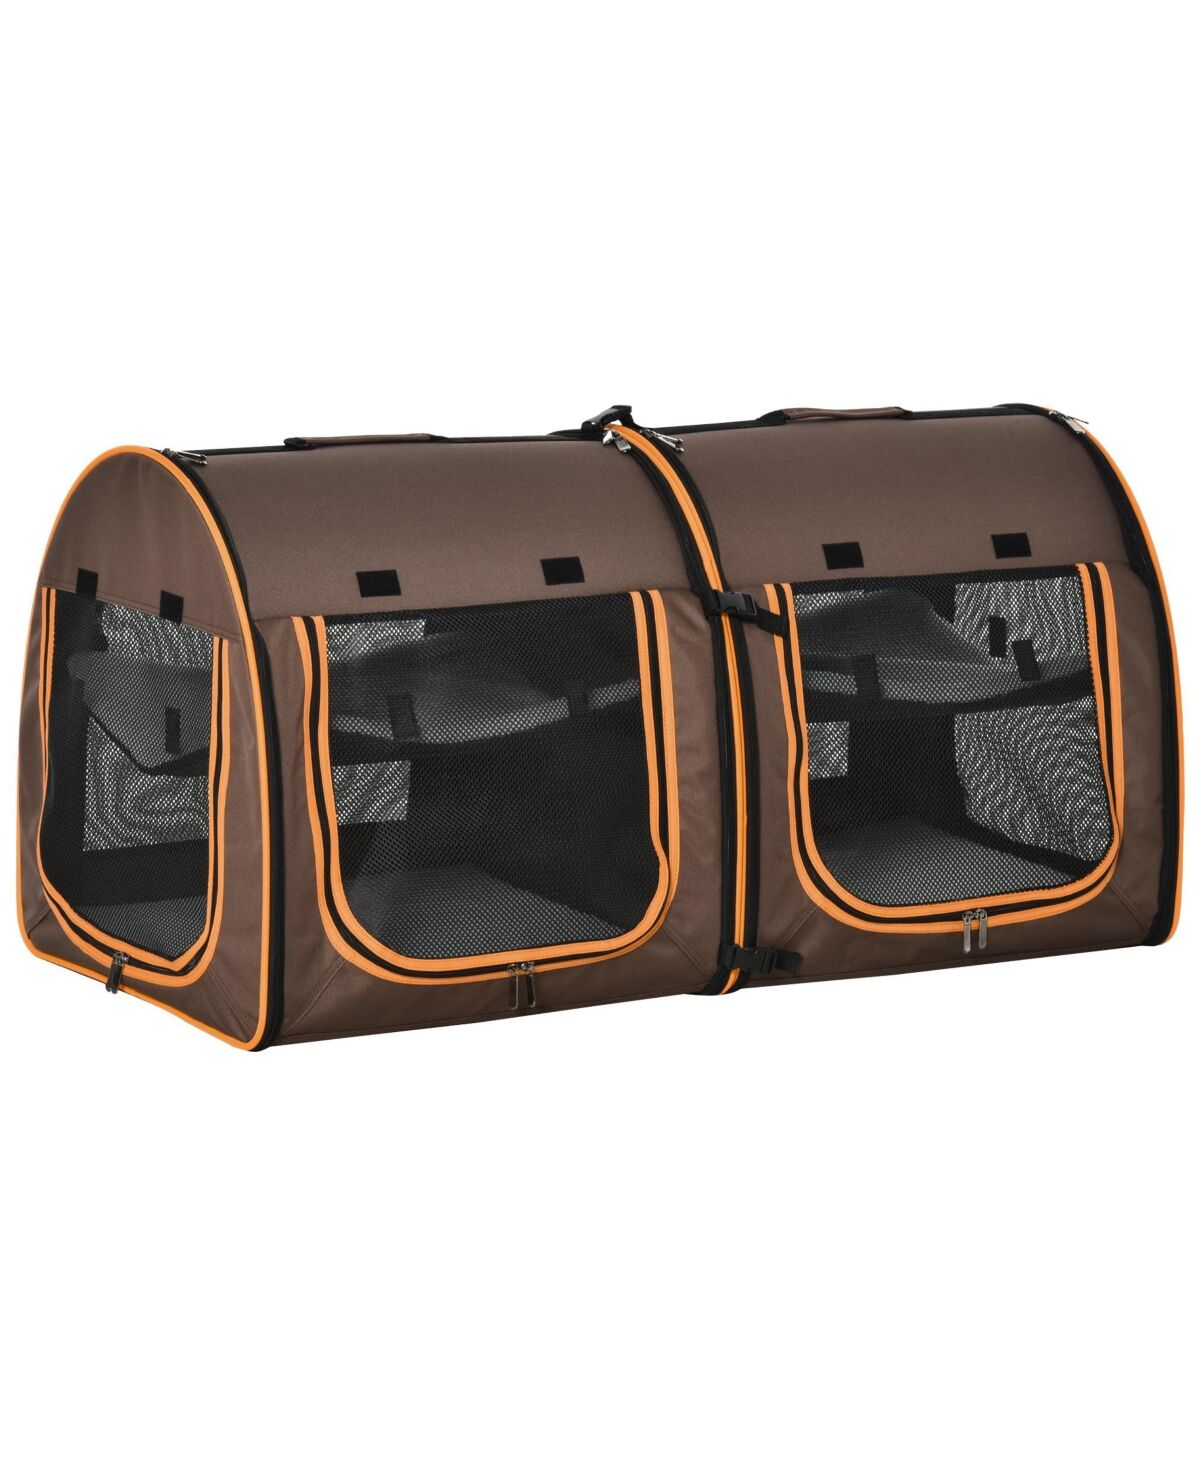 Pawhut Large Portable Double Pet Carrier Kennel Bag Oxford Travel Car Seat - Brown